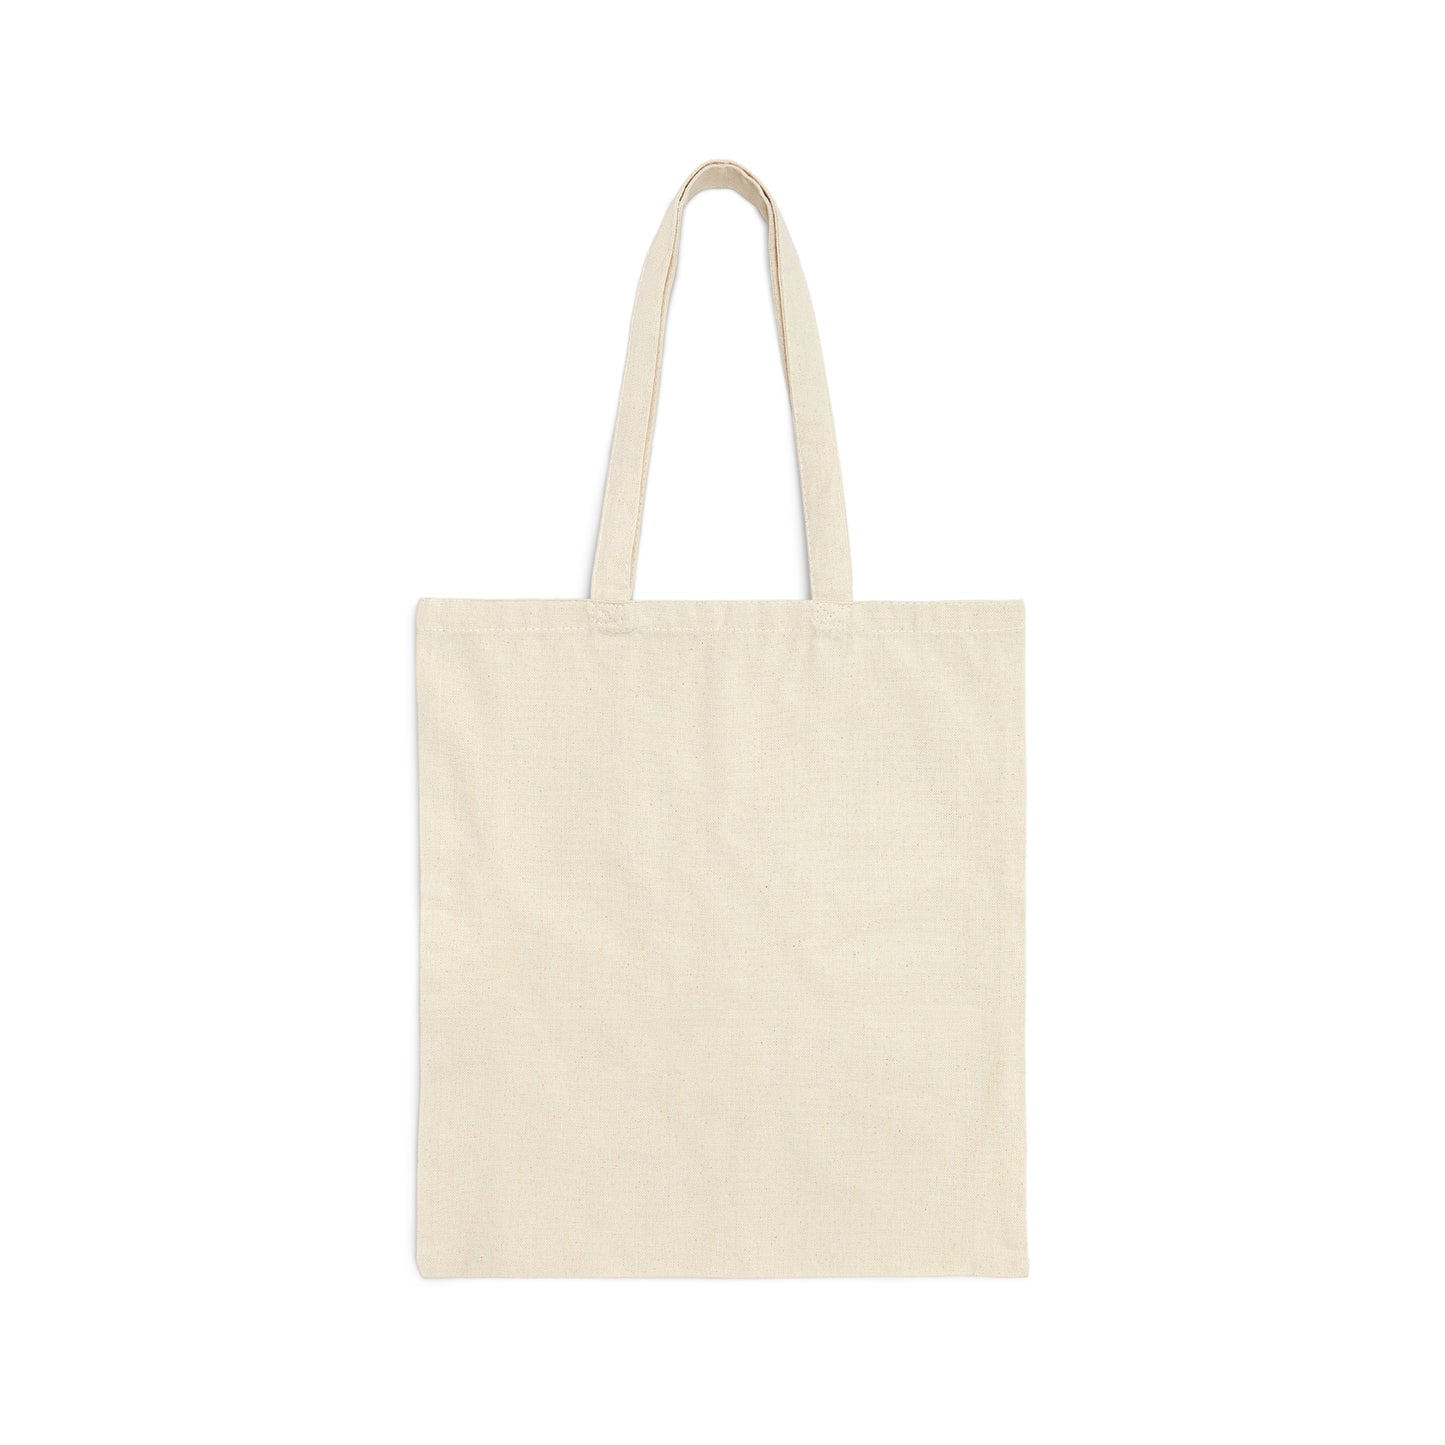 Daycare Vibes Teacher Canvas Tote Bag